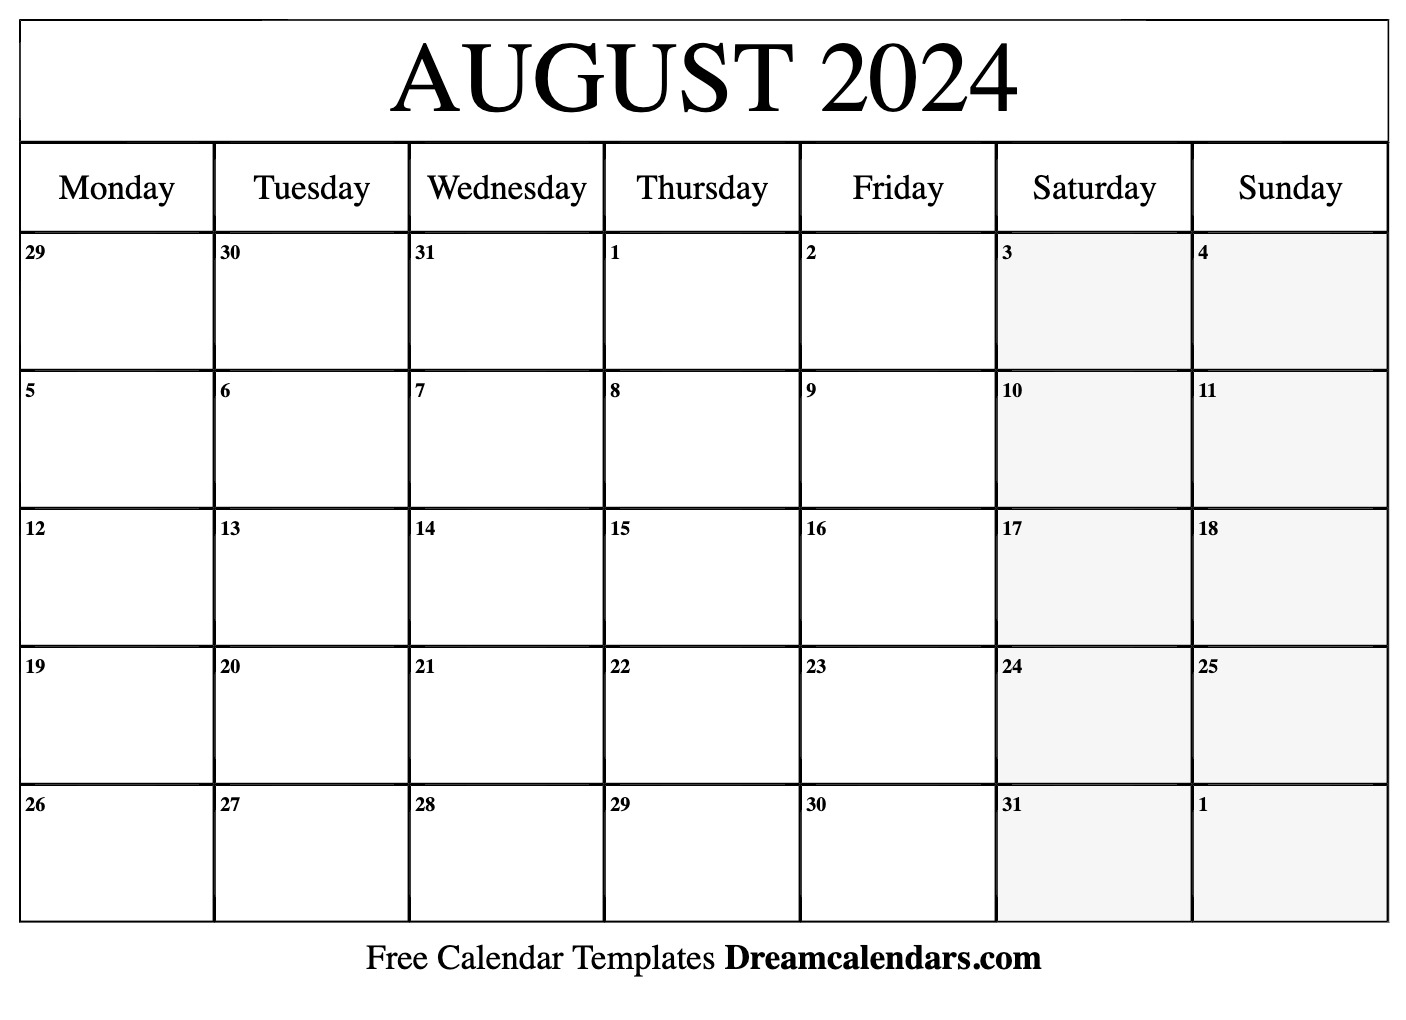 August 2024 Calendar | Free Blank Printable With Holidays for Printable August 2024 Calendar With Holidays